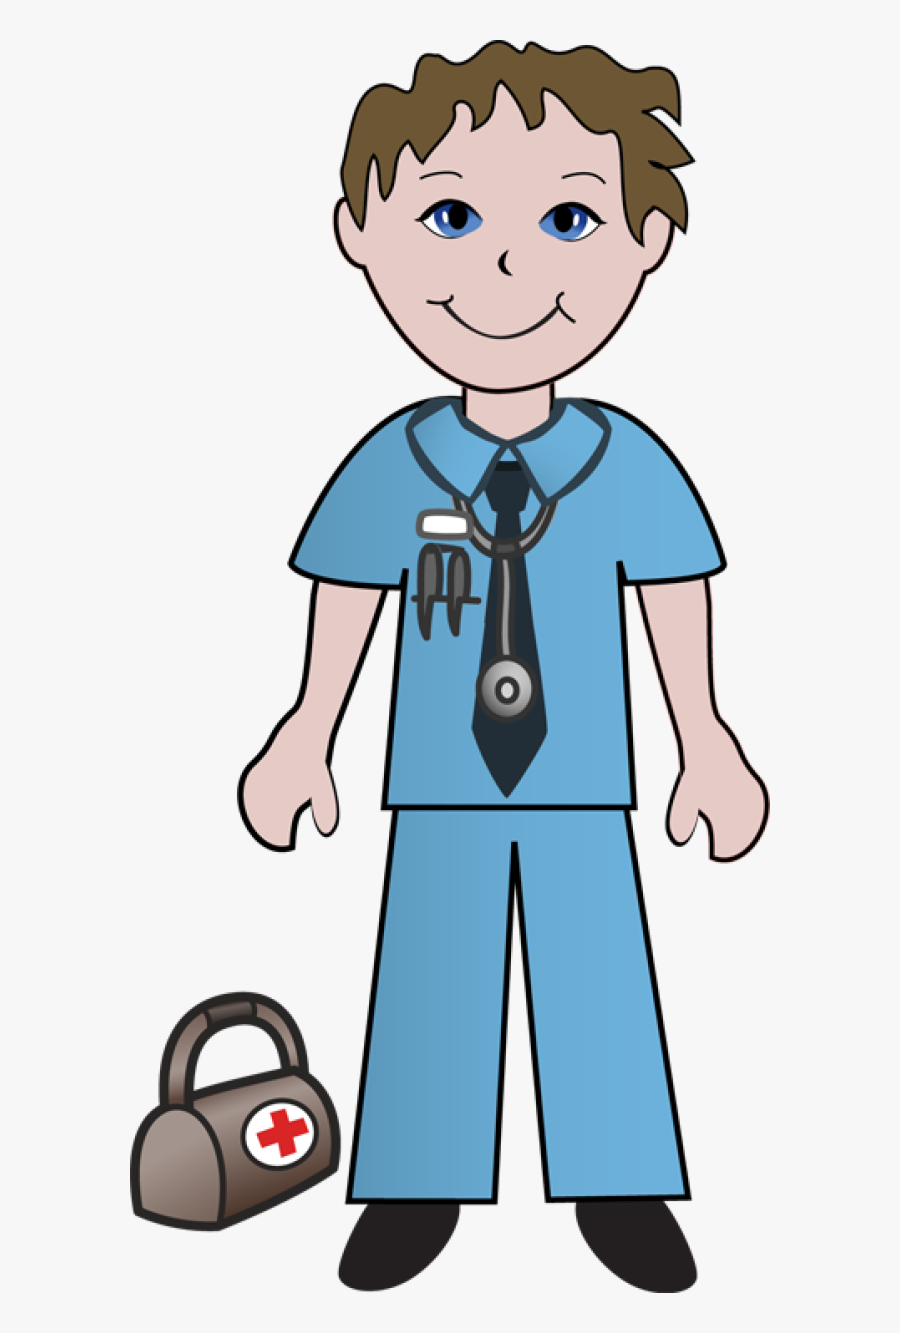 Clipart Of Doctor, Doctors And Ready - Nurse Clipart Black And White Free, Transparent Clipart